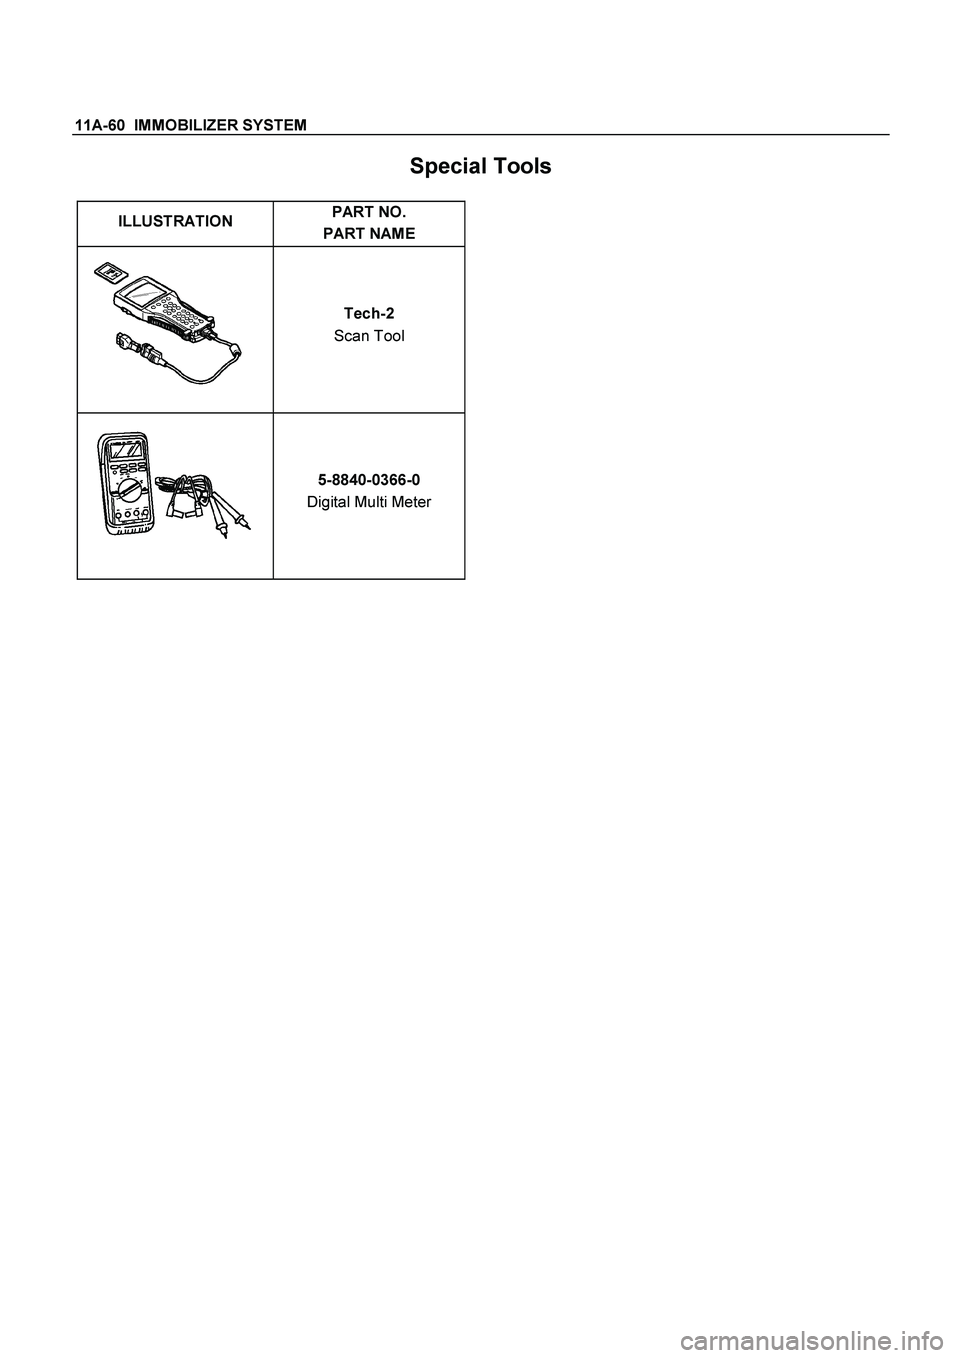 ISUZU TF SERIES 2004  Workshop Manual 11A-60  IMMOBILIZER SYSTEM
 
Special Tools 
 
ILLUSTRATION PART NO. 
PART NAME  
  
 Tech-2 
Scan Tool     
 5-8840-0366-0
 
Digital Multi Meter     
 
  